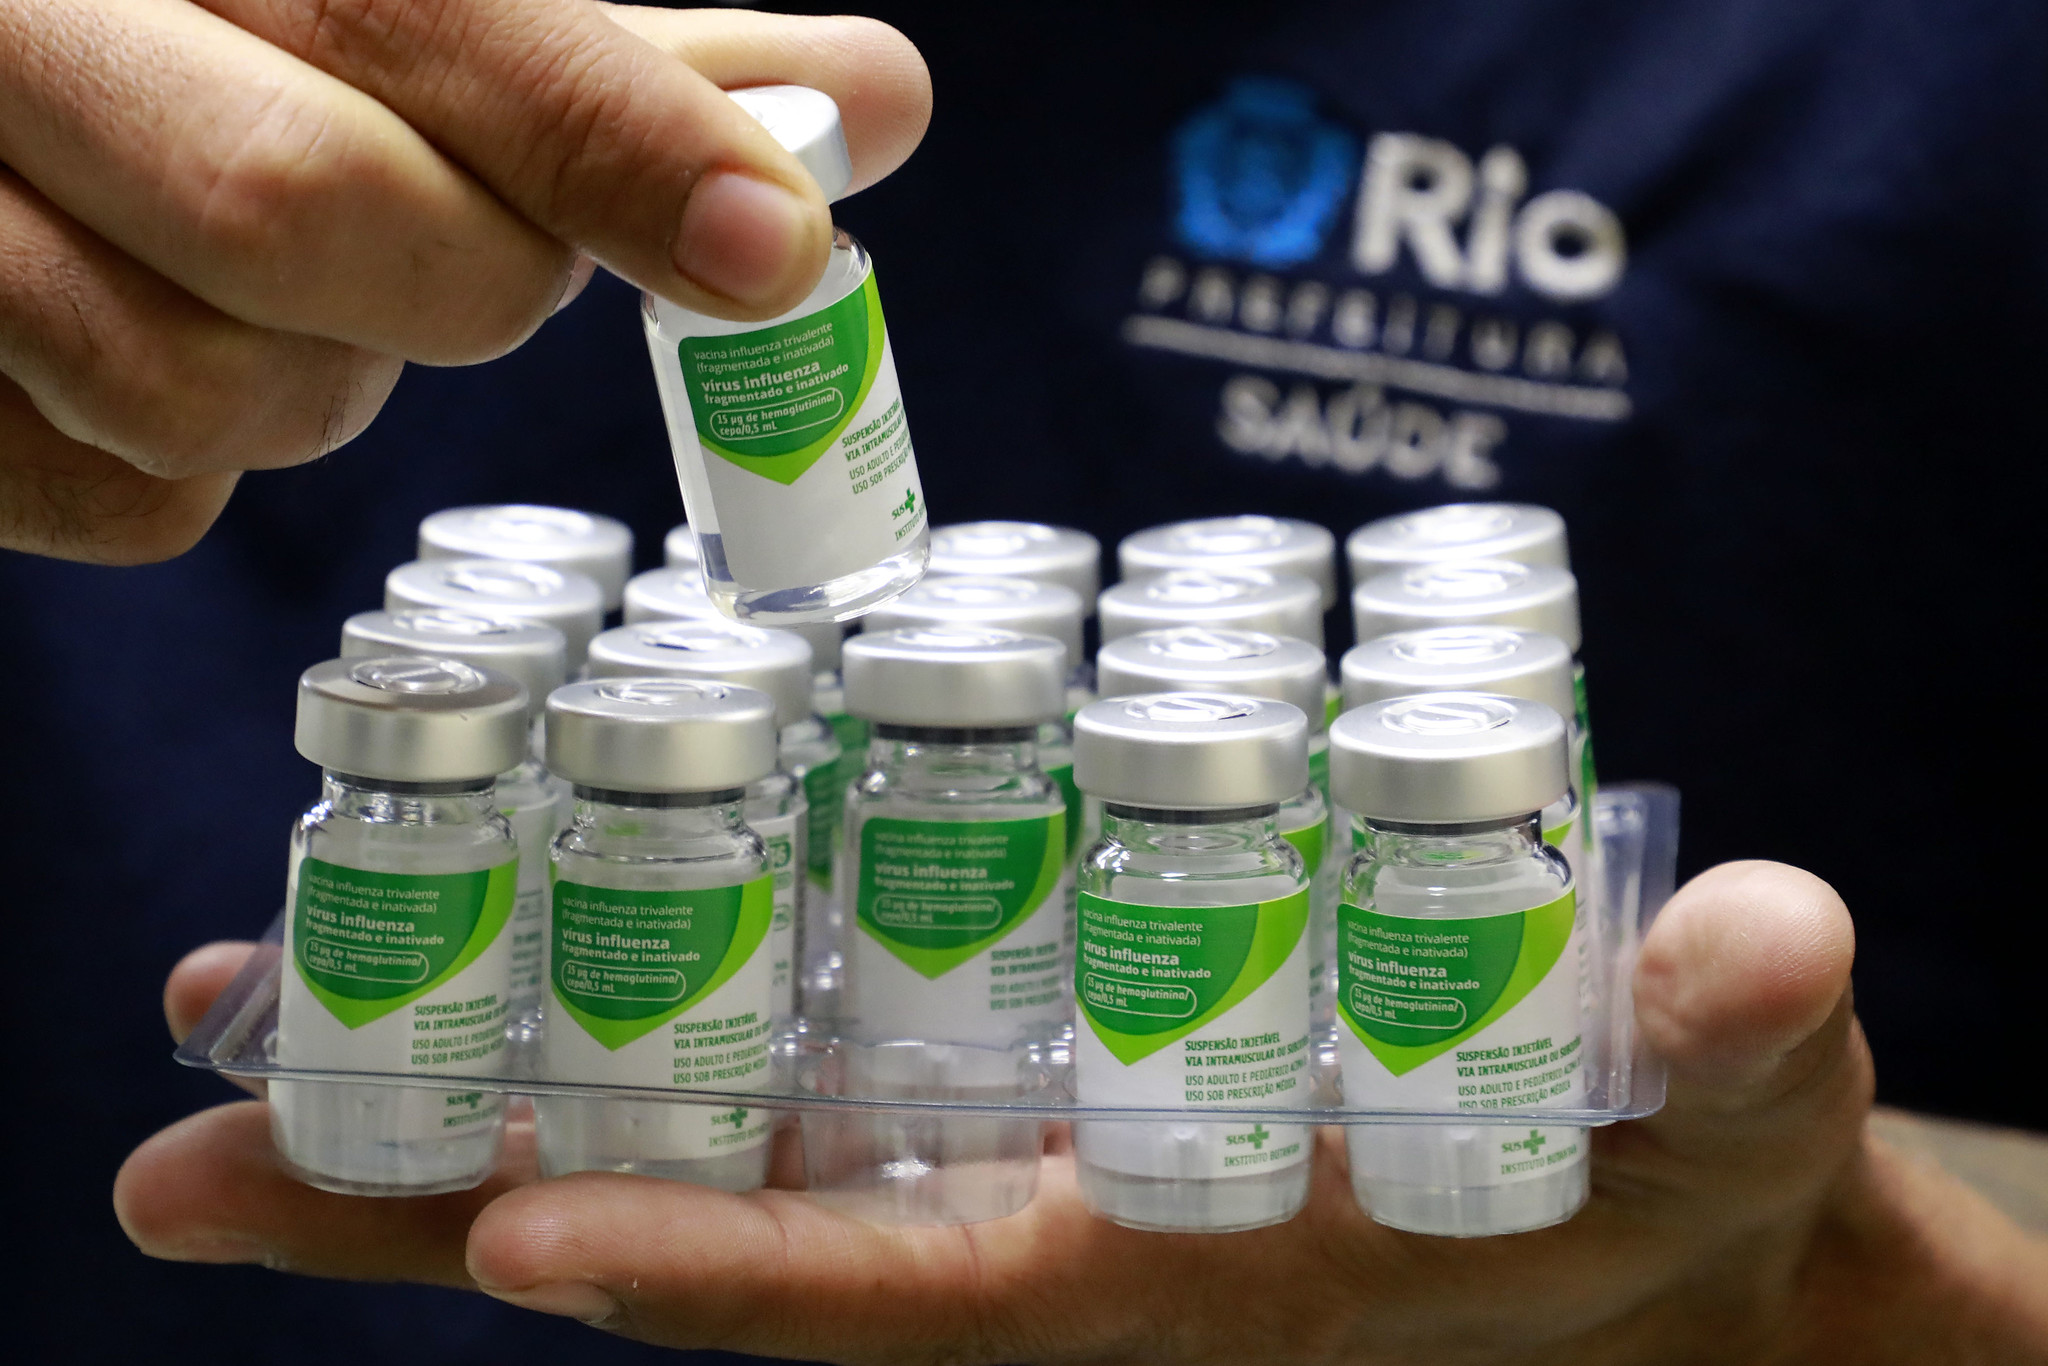 Rio extends flu vaccination campaign for people aged six months and over – Rio de Janeiro City Hall